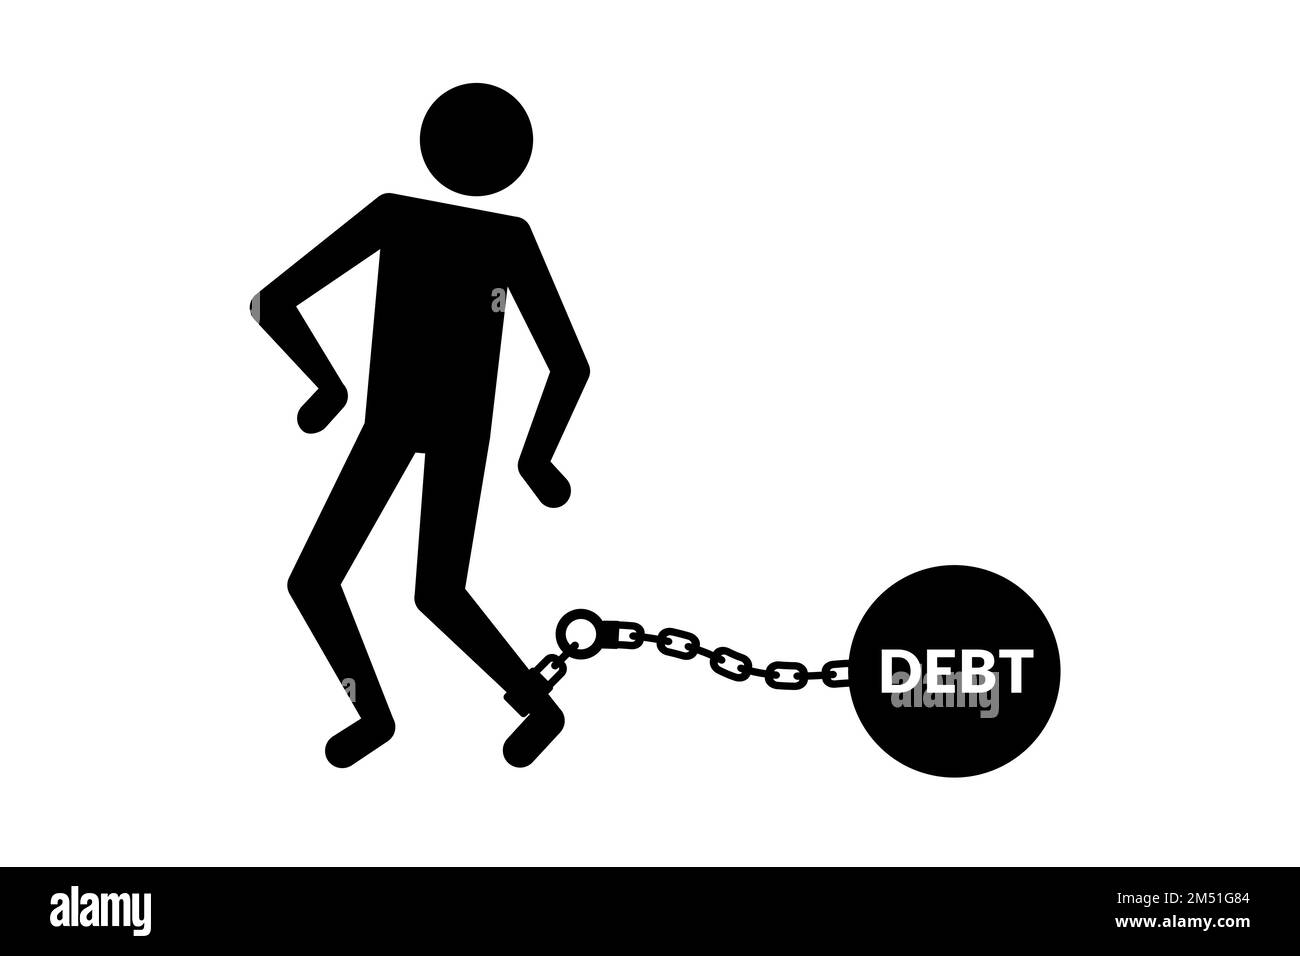 Human icon drowning chained with debt. Vector illustration Stock Vector